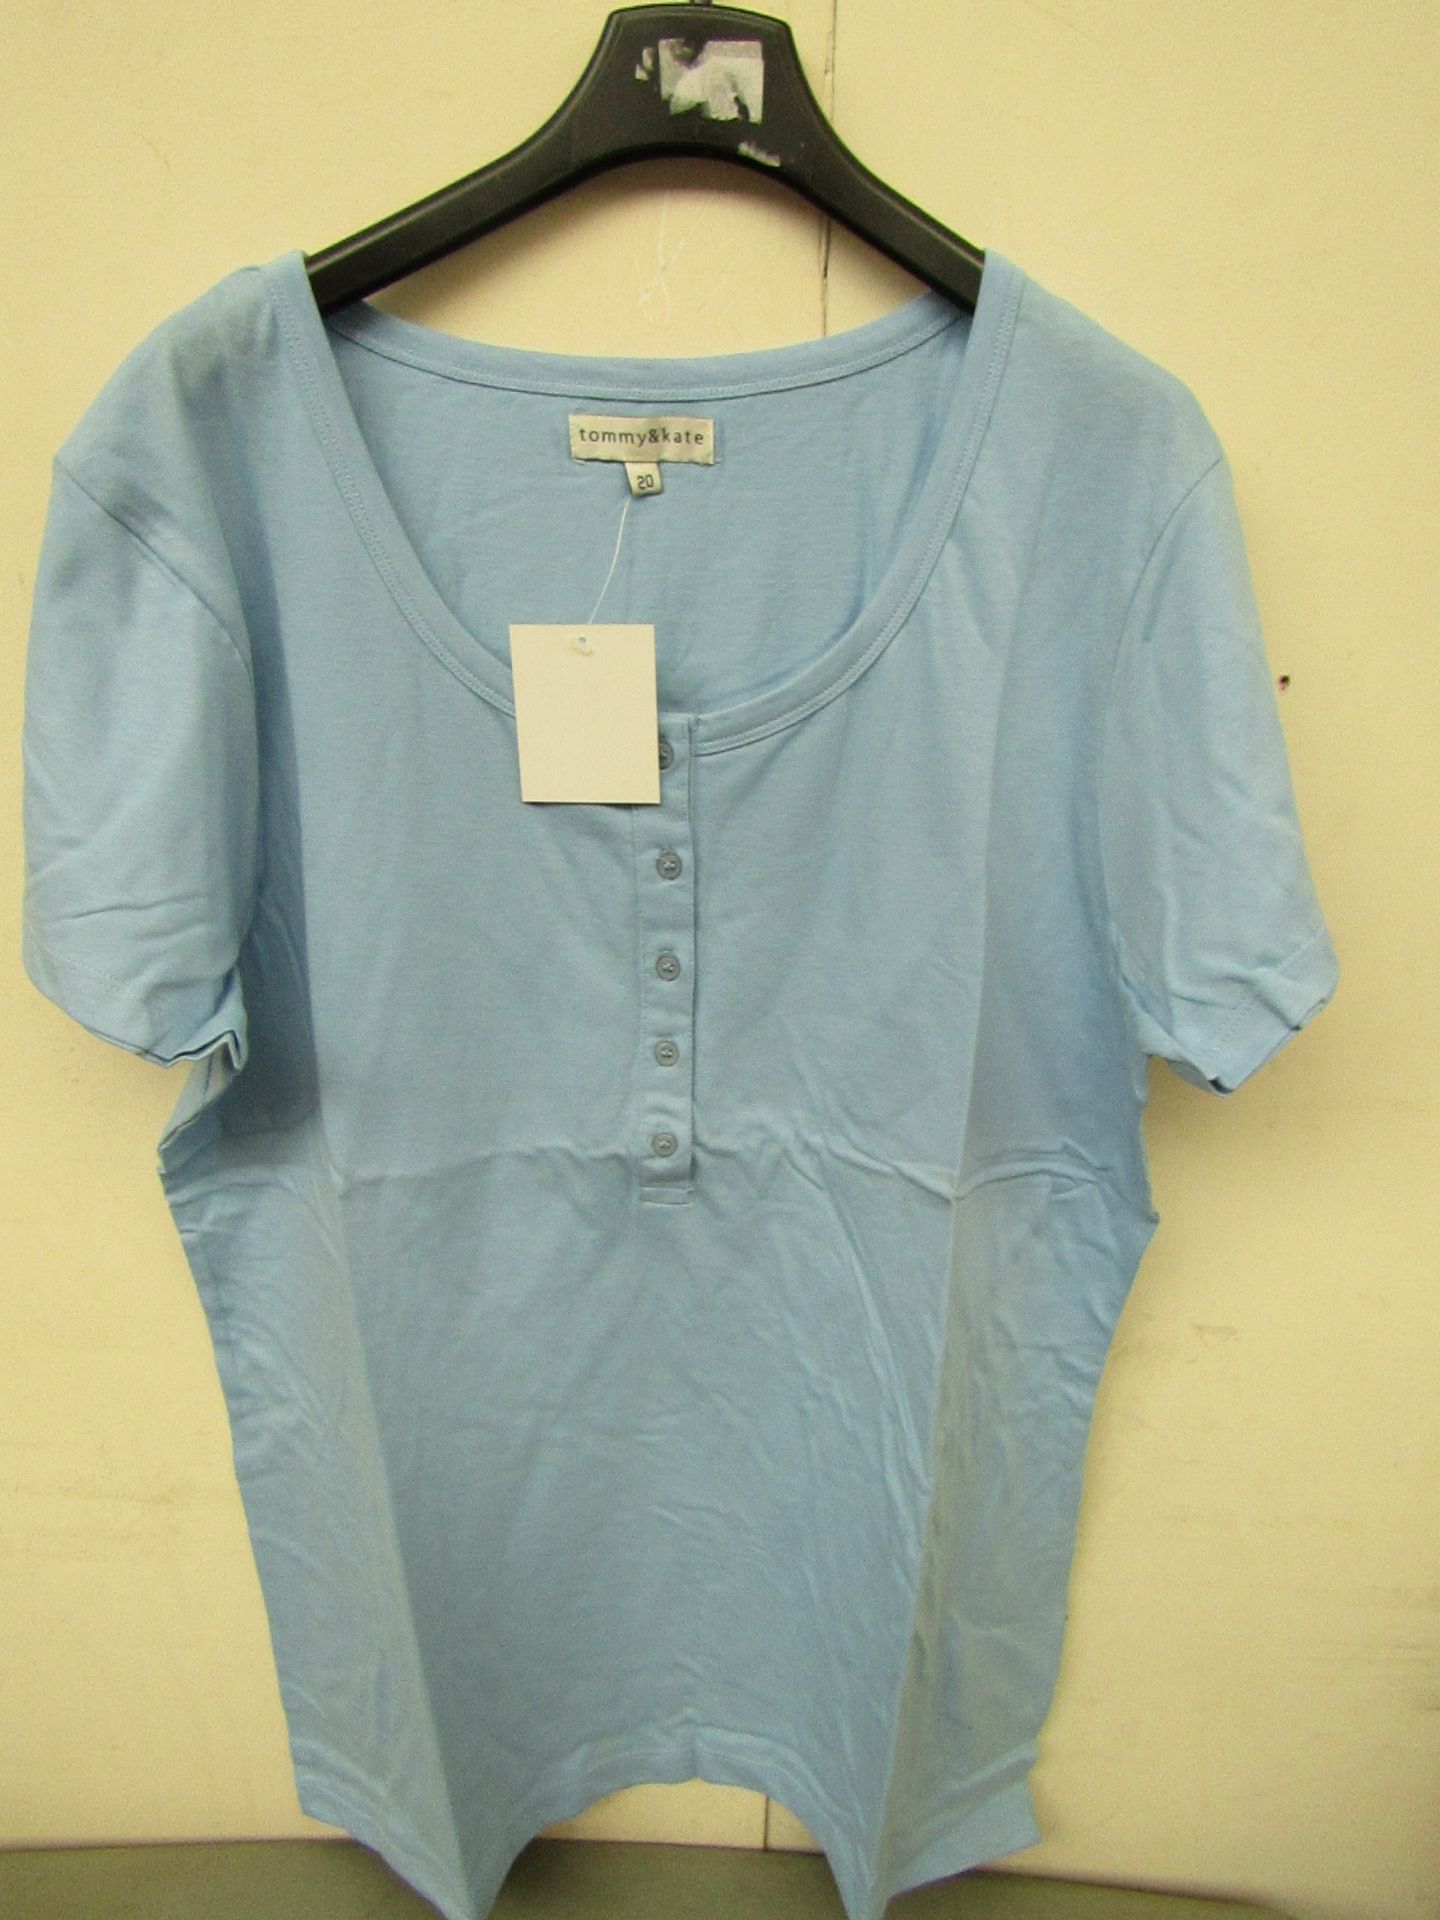 11 X Tommy & Kate ladies blue t/shirts 4 x size 22, 5 x size 20, 2 x size 14, all new in packaging